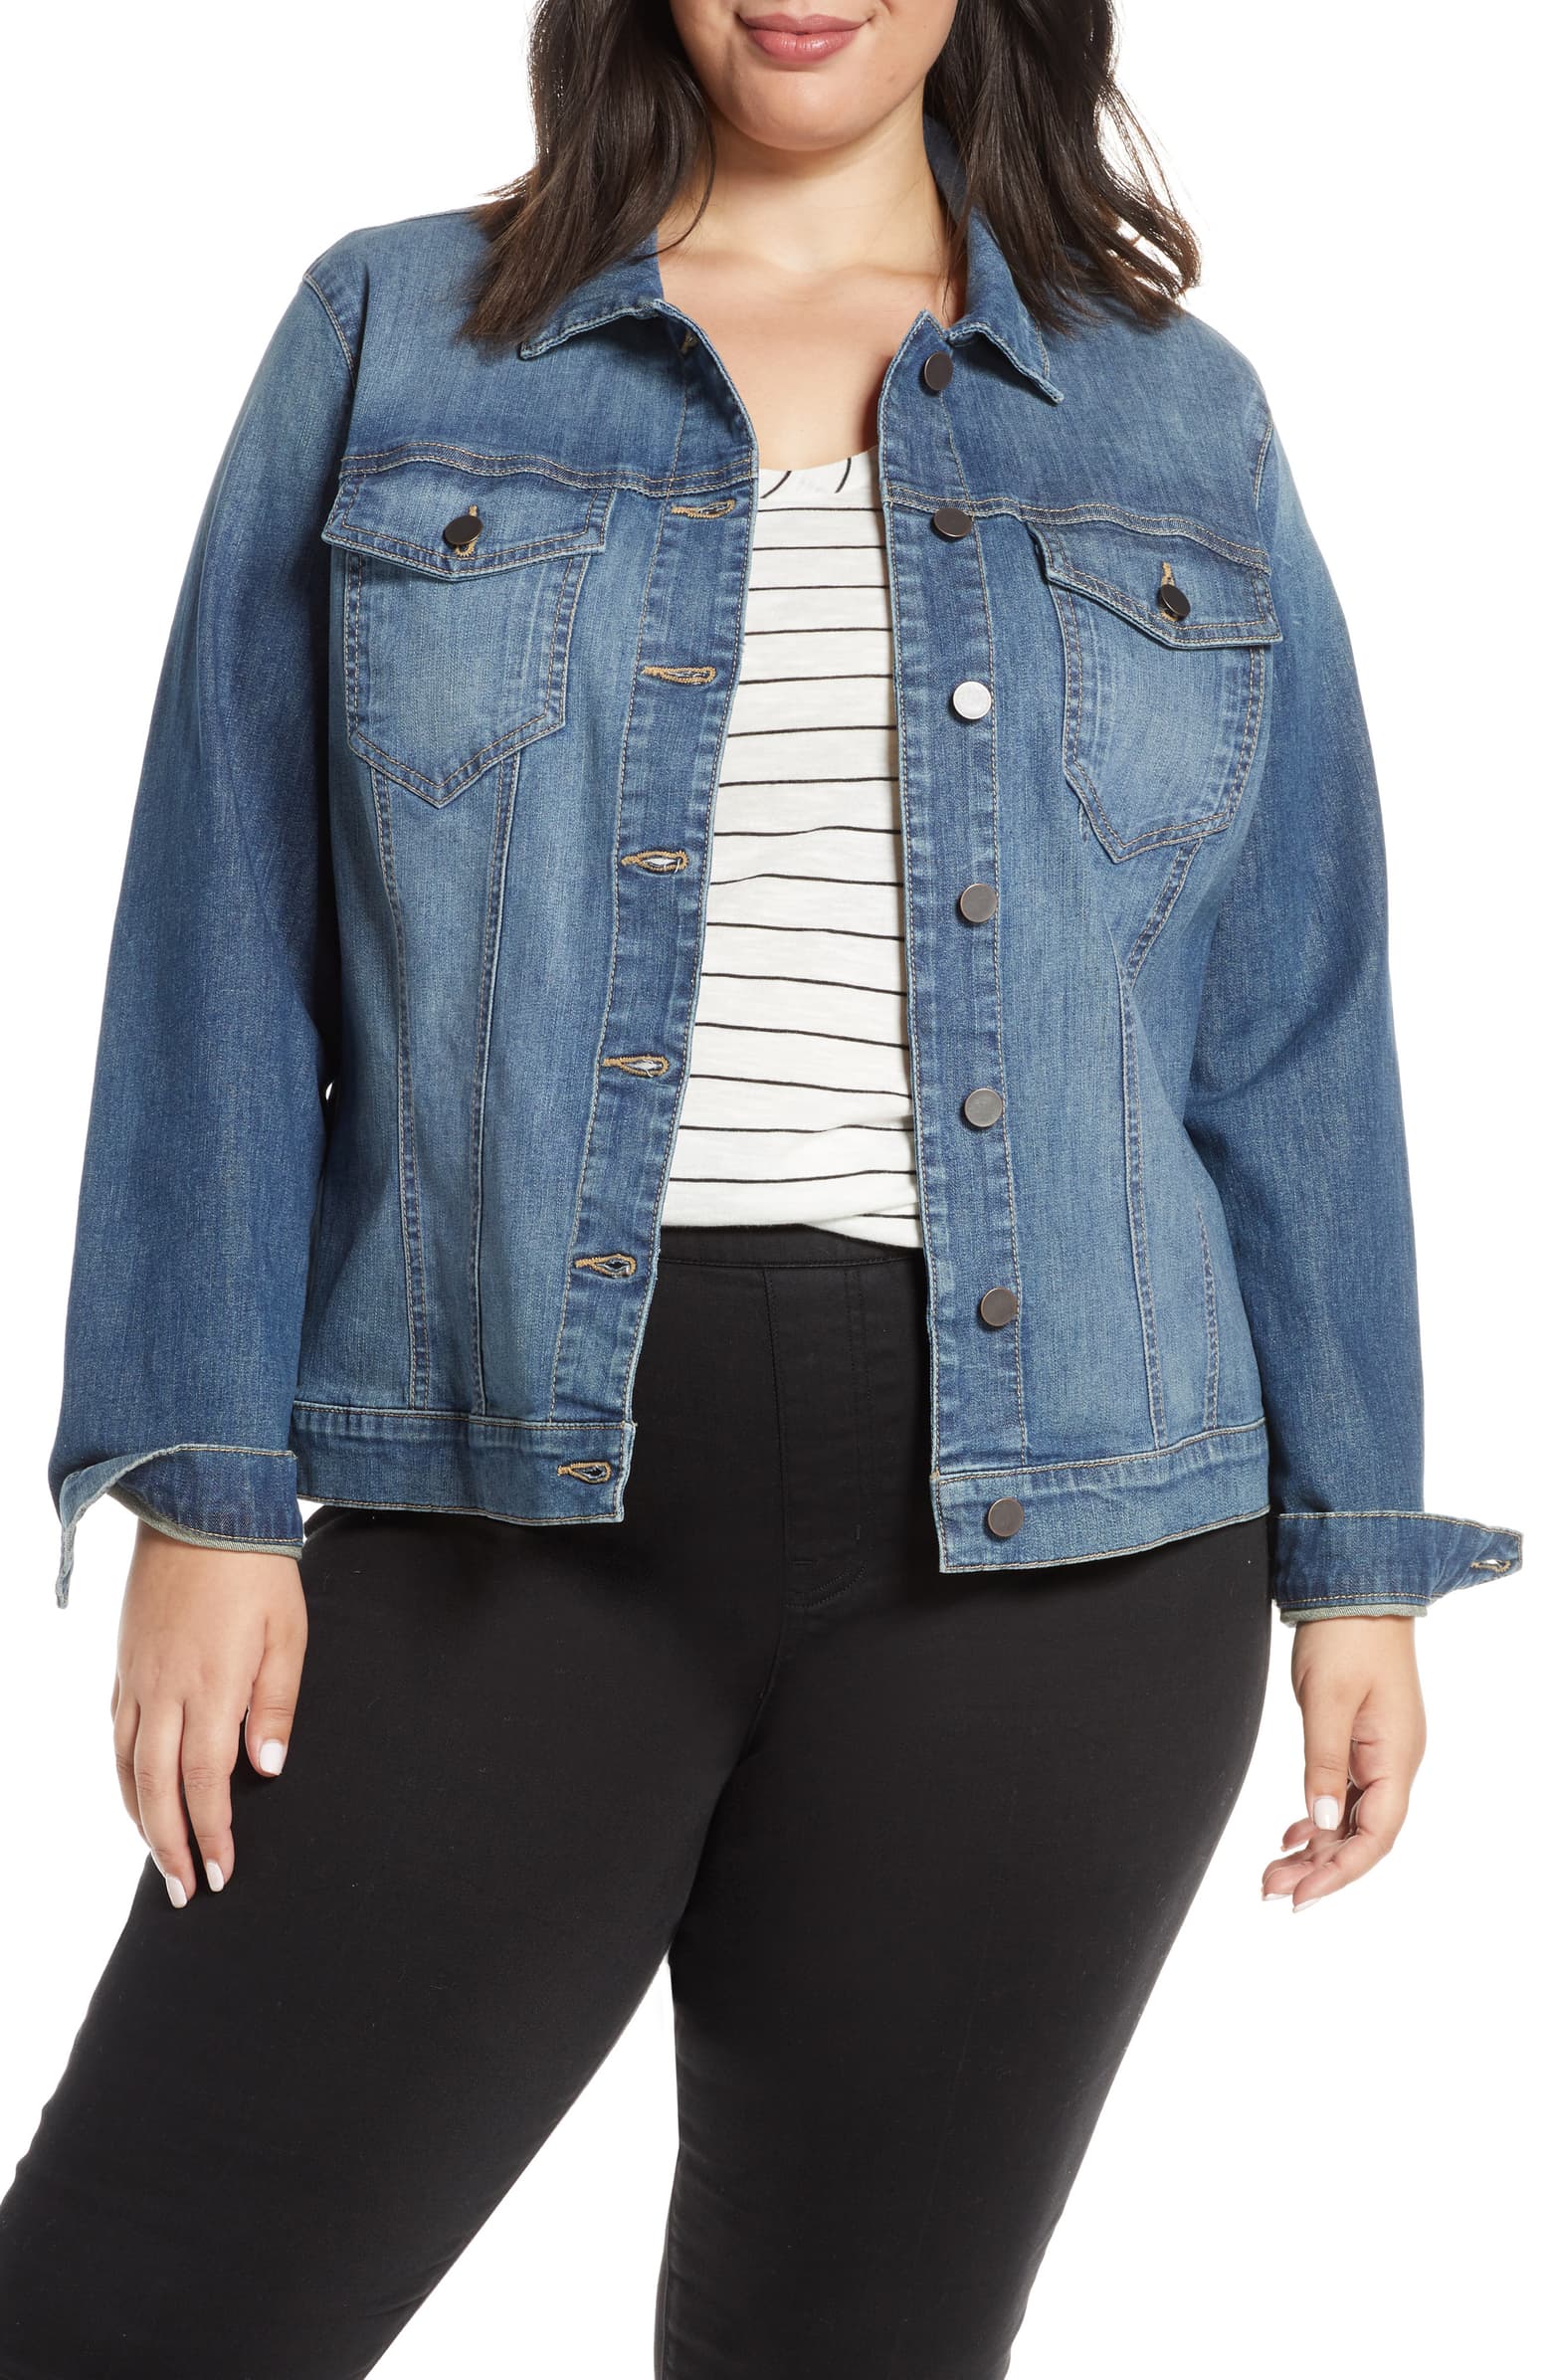 5 Curvy Girl Denim Essentials To Grab From Nordstrom’s Anniversary Sale